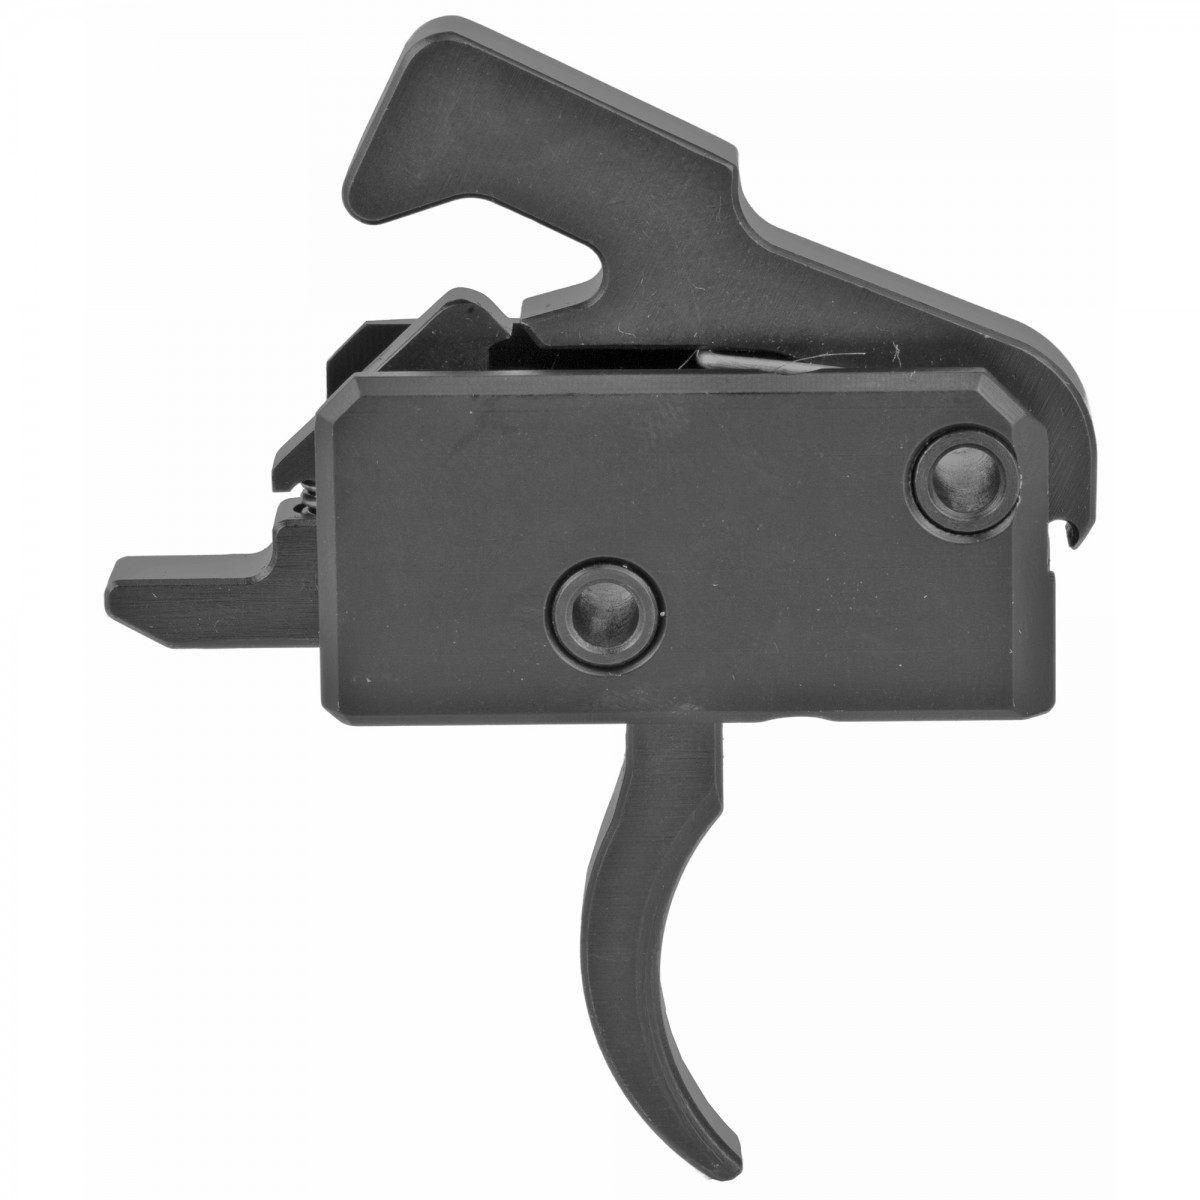 RISE Armament LE145 Tactical Trigger with Anti-Walk Pins